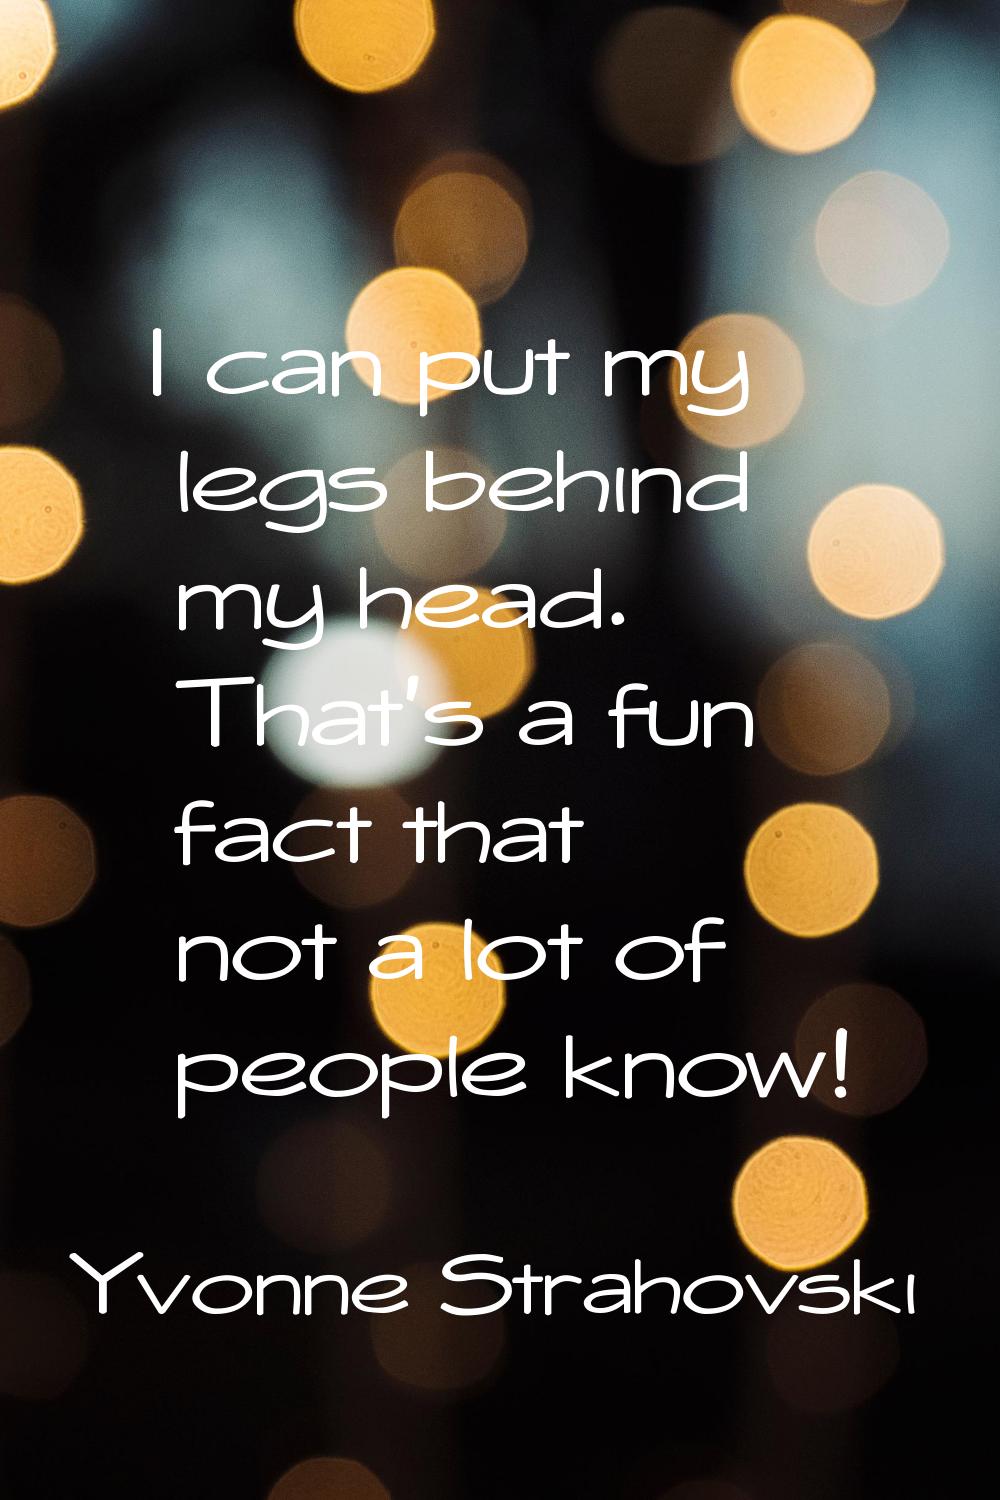 I can put my legs behind my head. That's a fun fact that not a lot of people know!